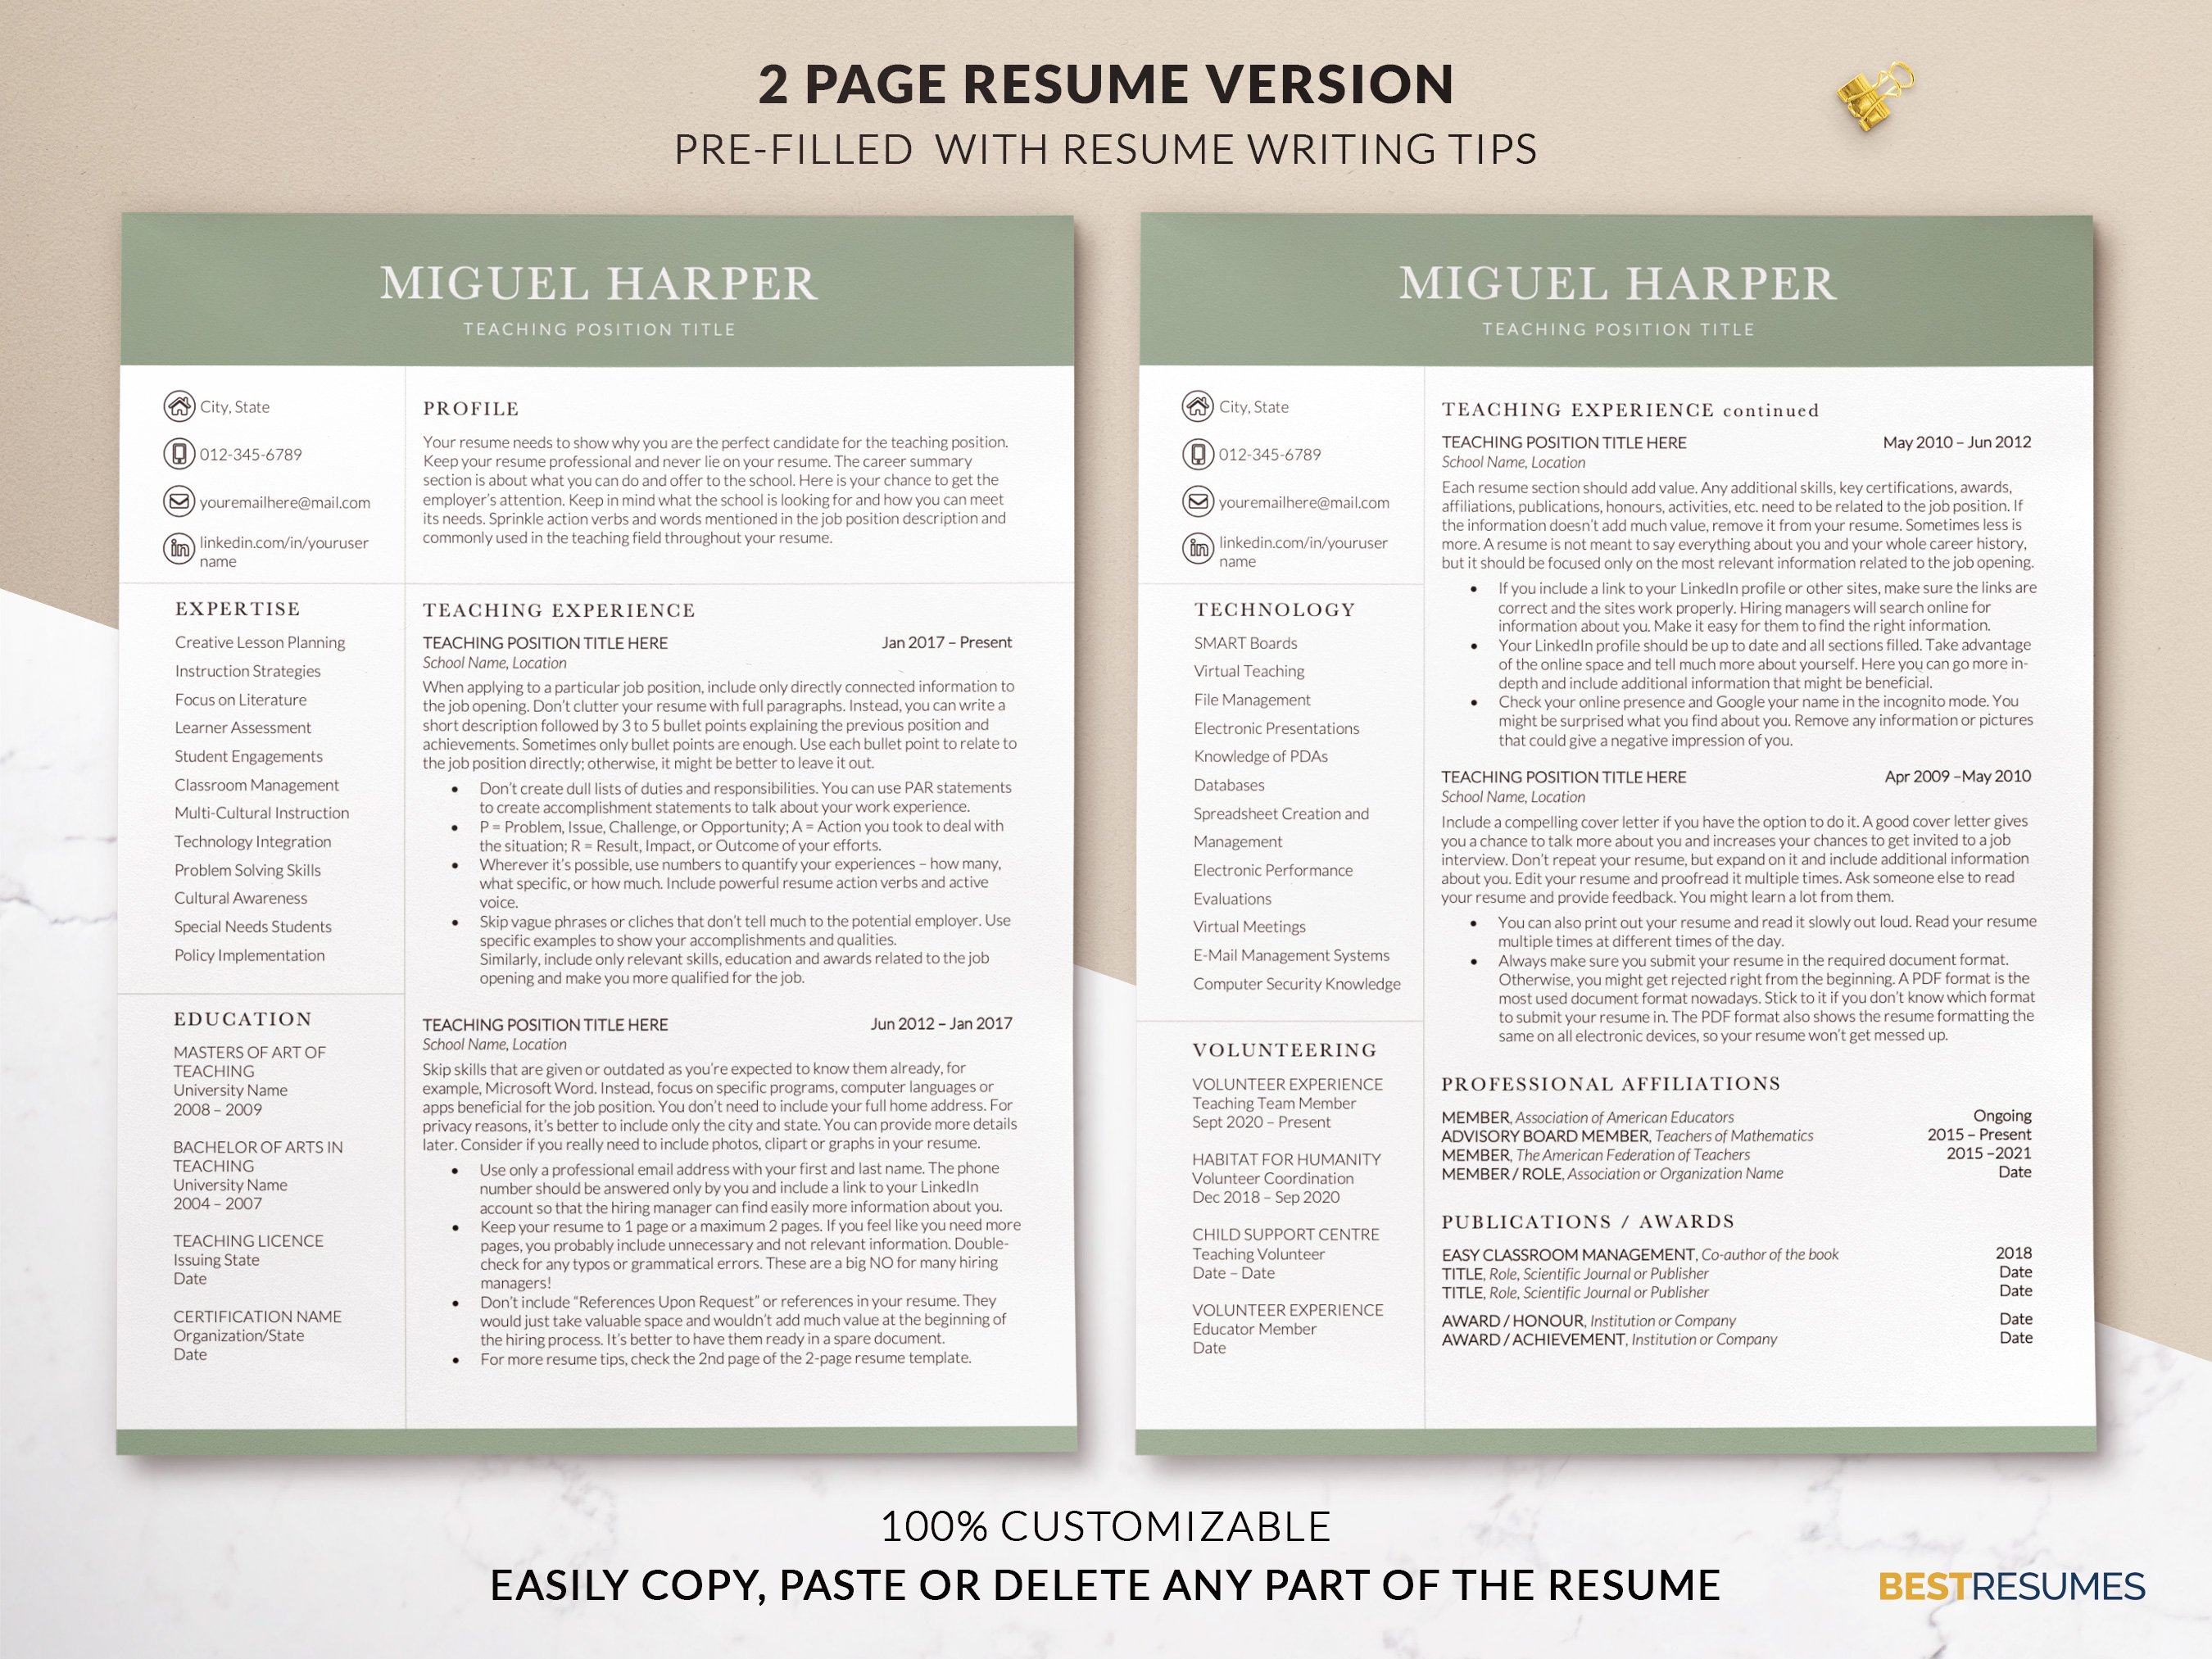 experienced teacher resume template two page resume miguel harper 979